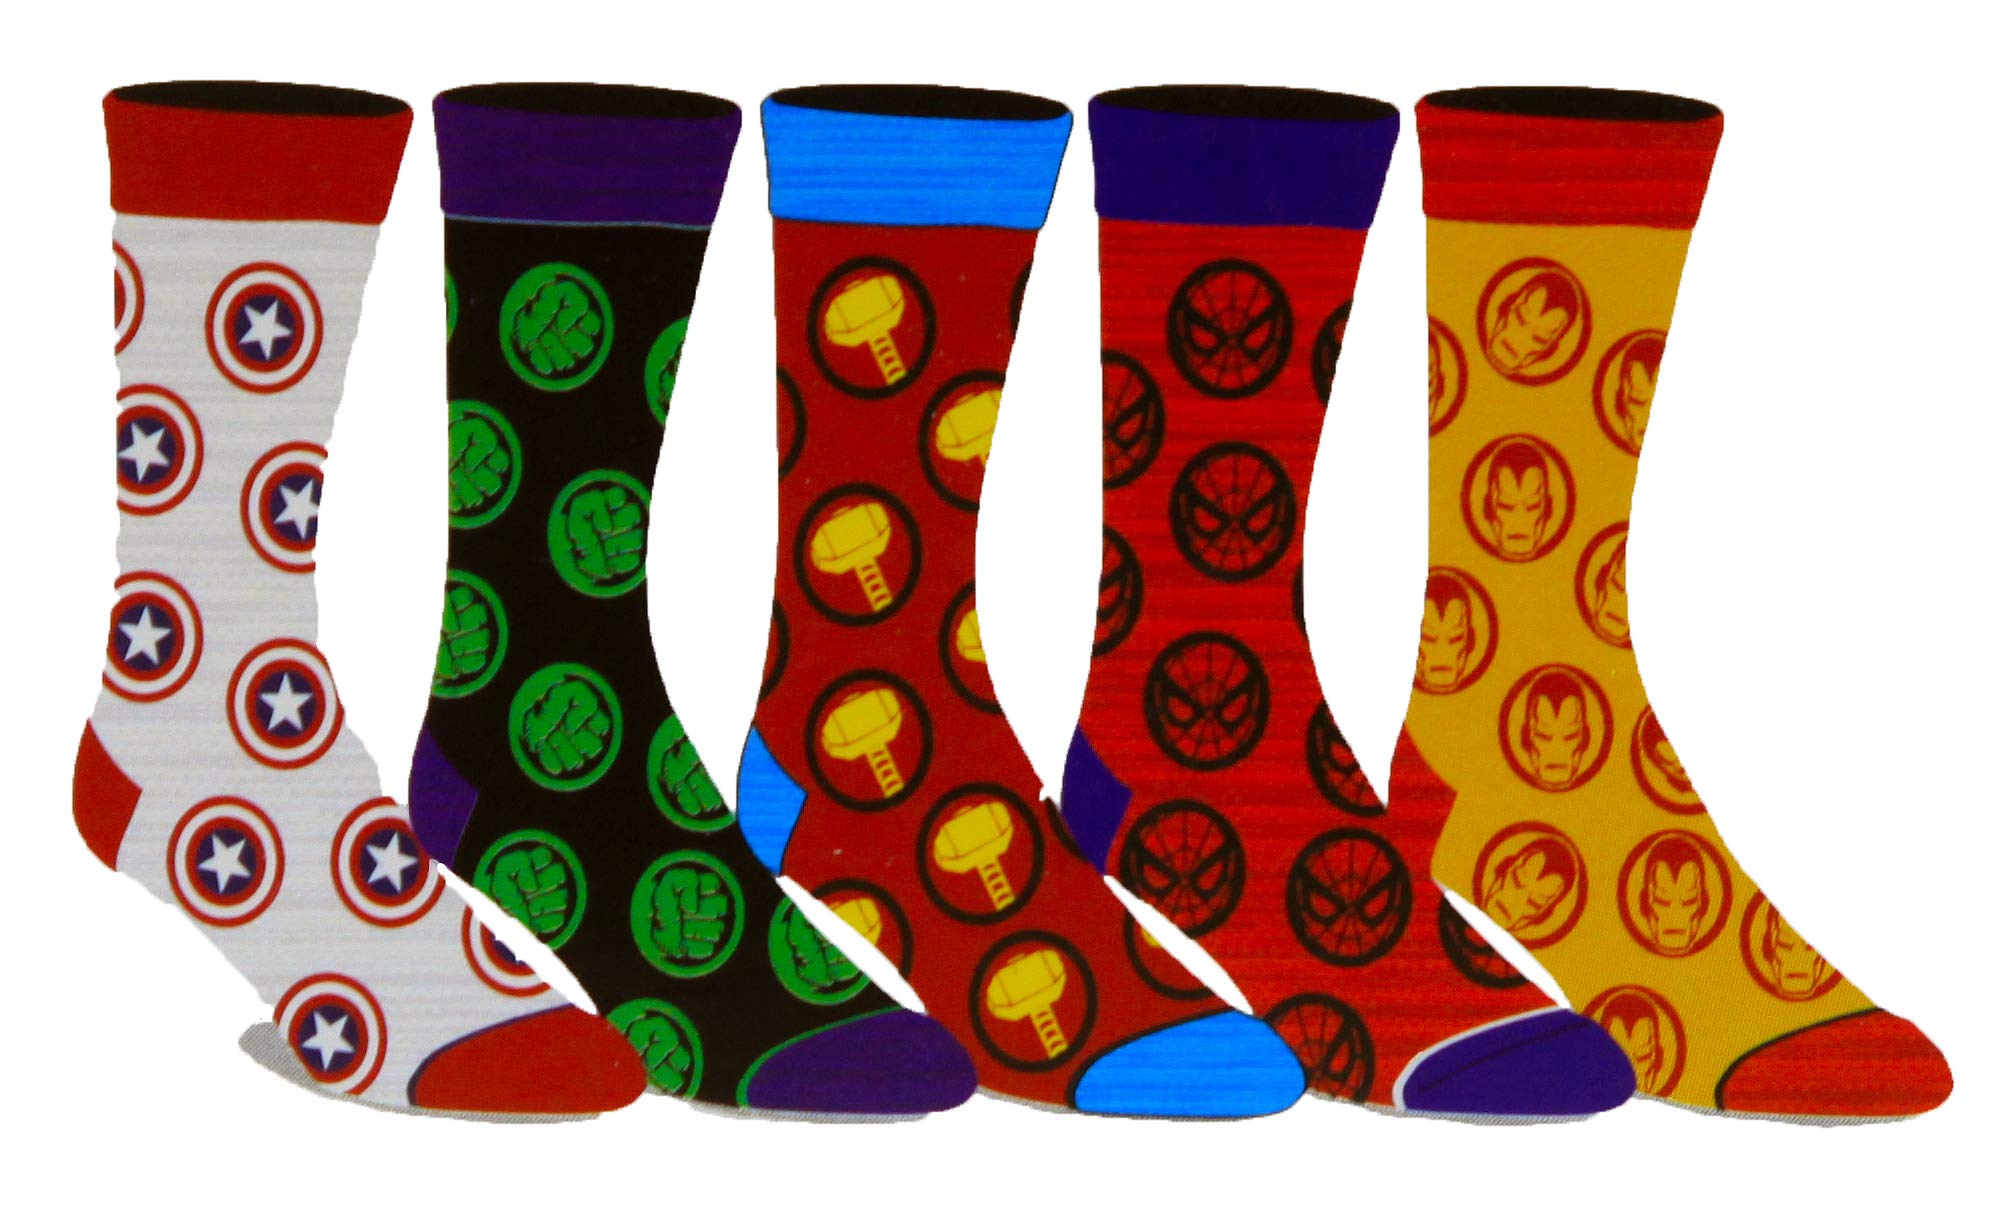 Bioworld Marvel Avengers Casual Crew Socks, Multicolored, Pack of 5, Size 8-12